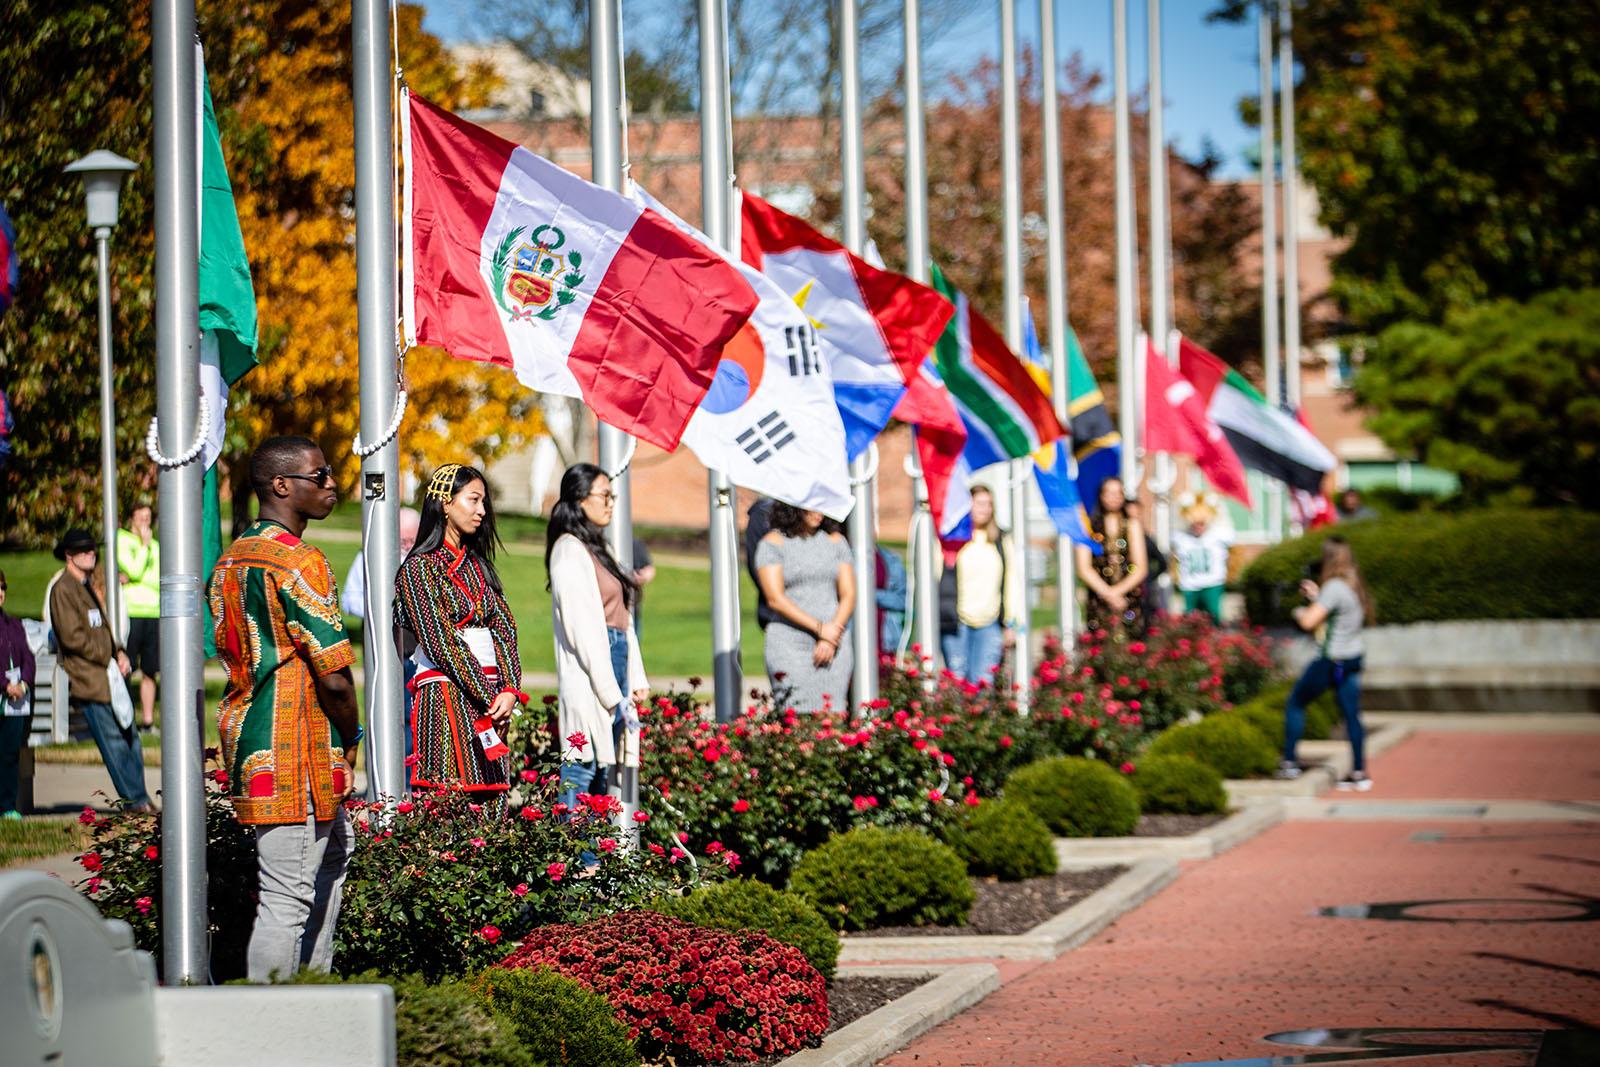 Northwest international students participate in a flag-raising ceremony during Homecoming activities each fall to celebrate their homelands and cultures as well the University’s diversity. 